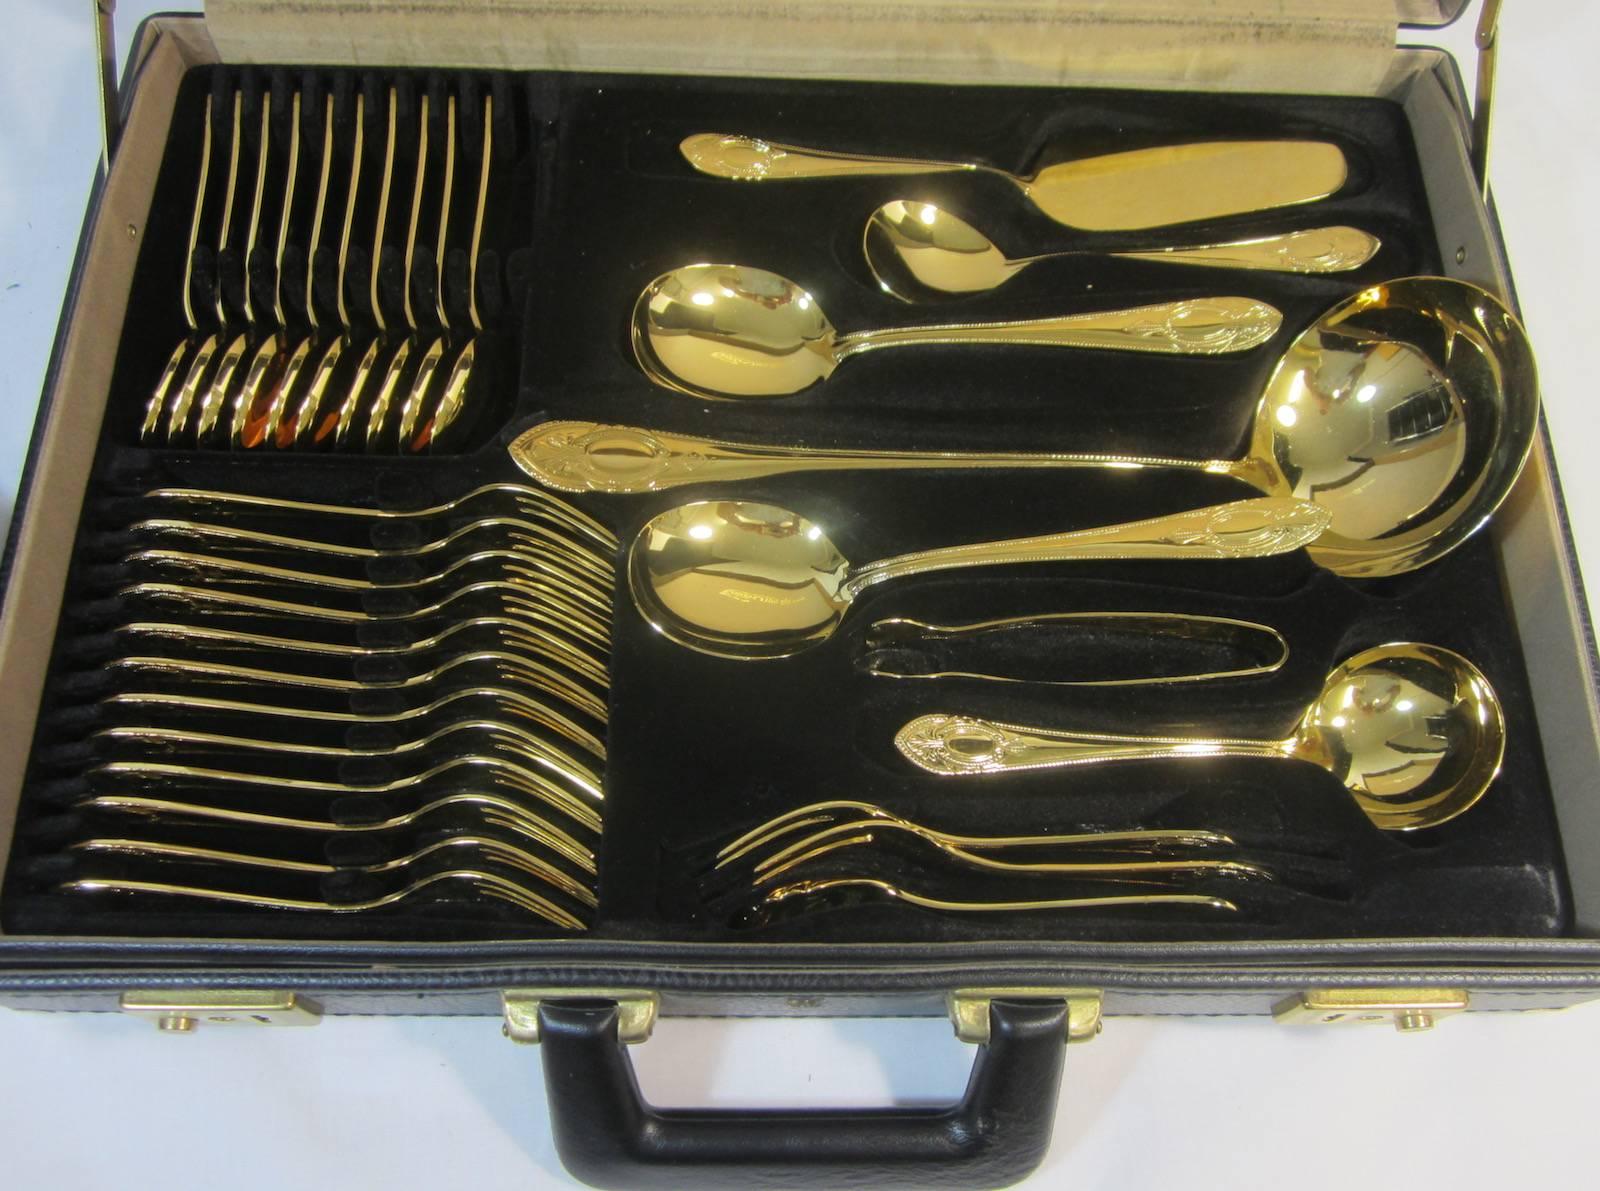 Bestecke Solingen German 23-24-Karat gold-plated 12 person cutlery set in a carry case with two layers.